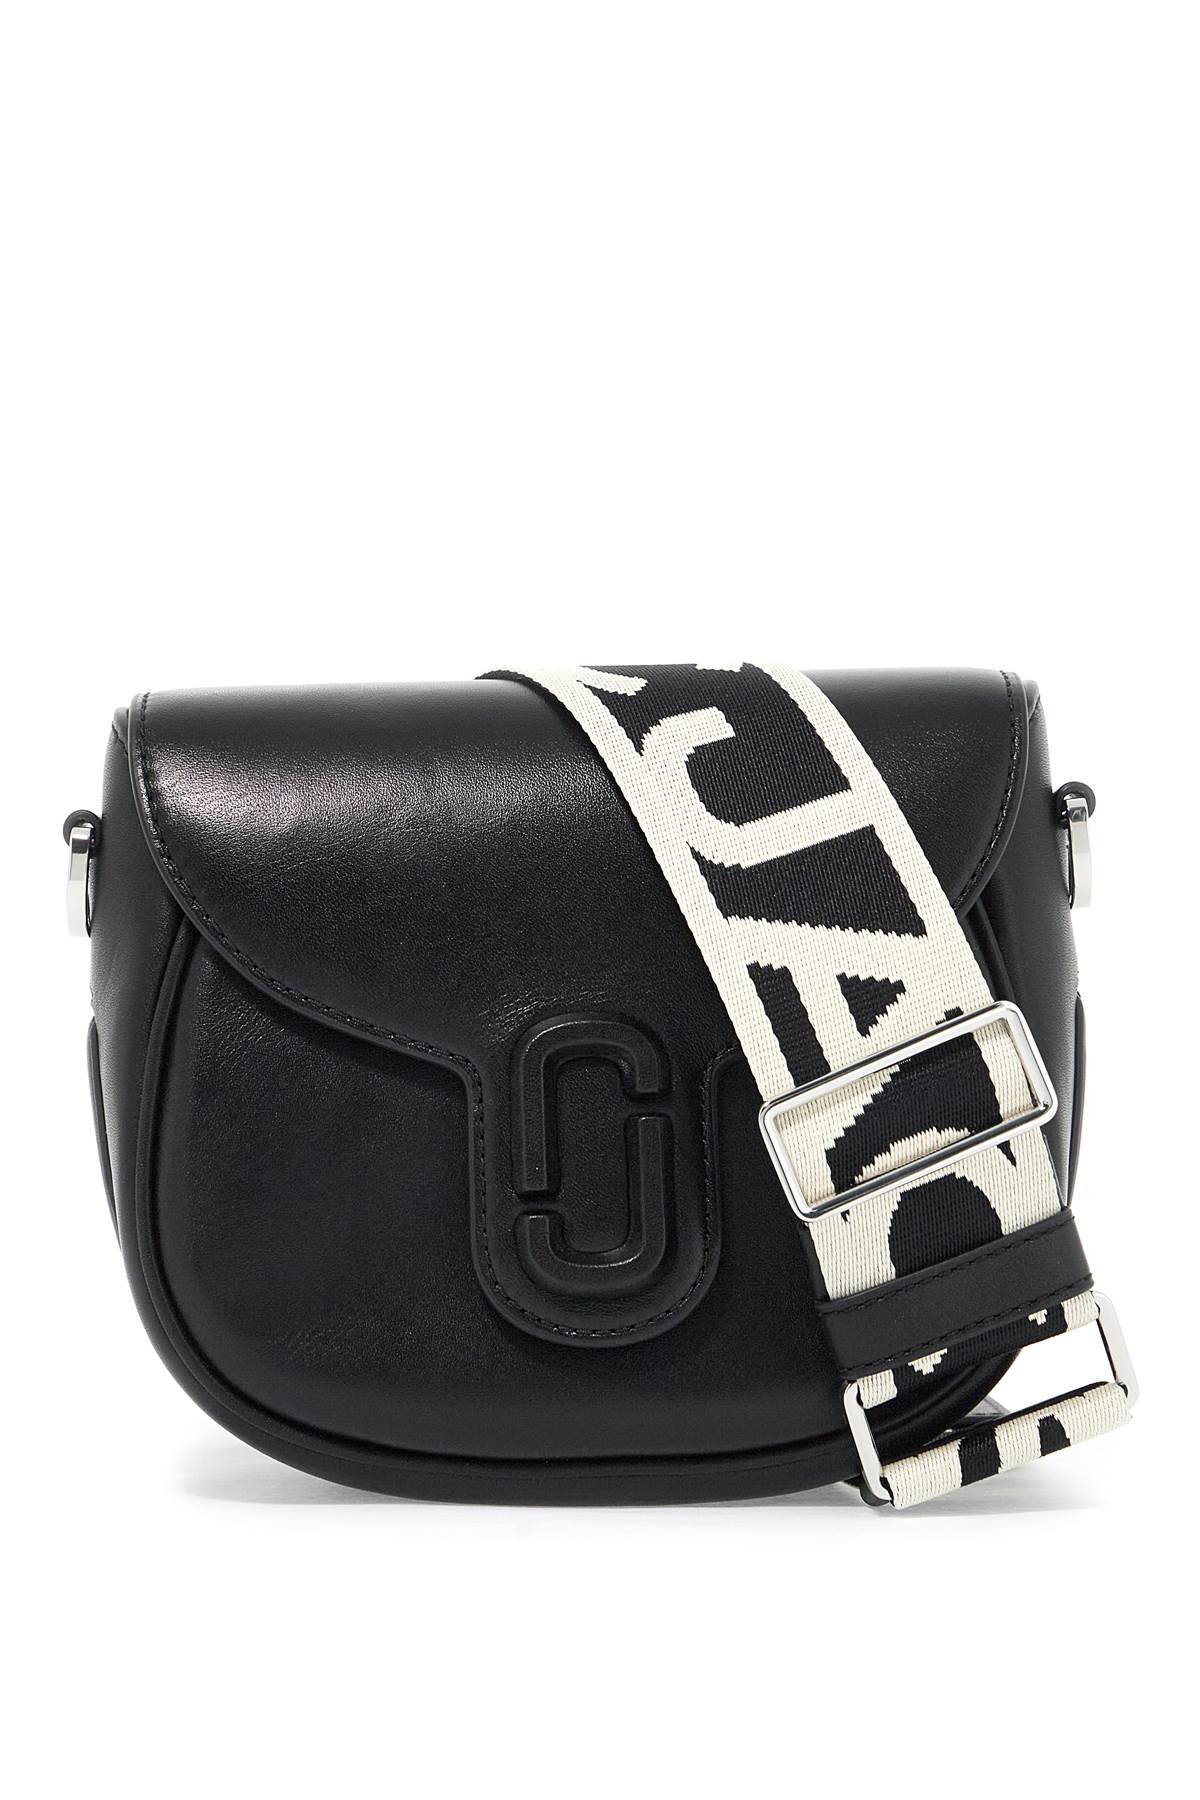 Marc Jacobs MARC JACOBS the covered j marc saddle bag